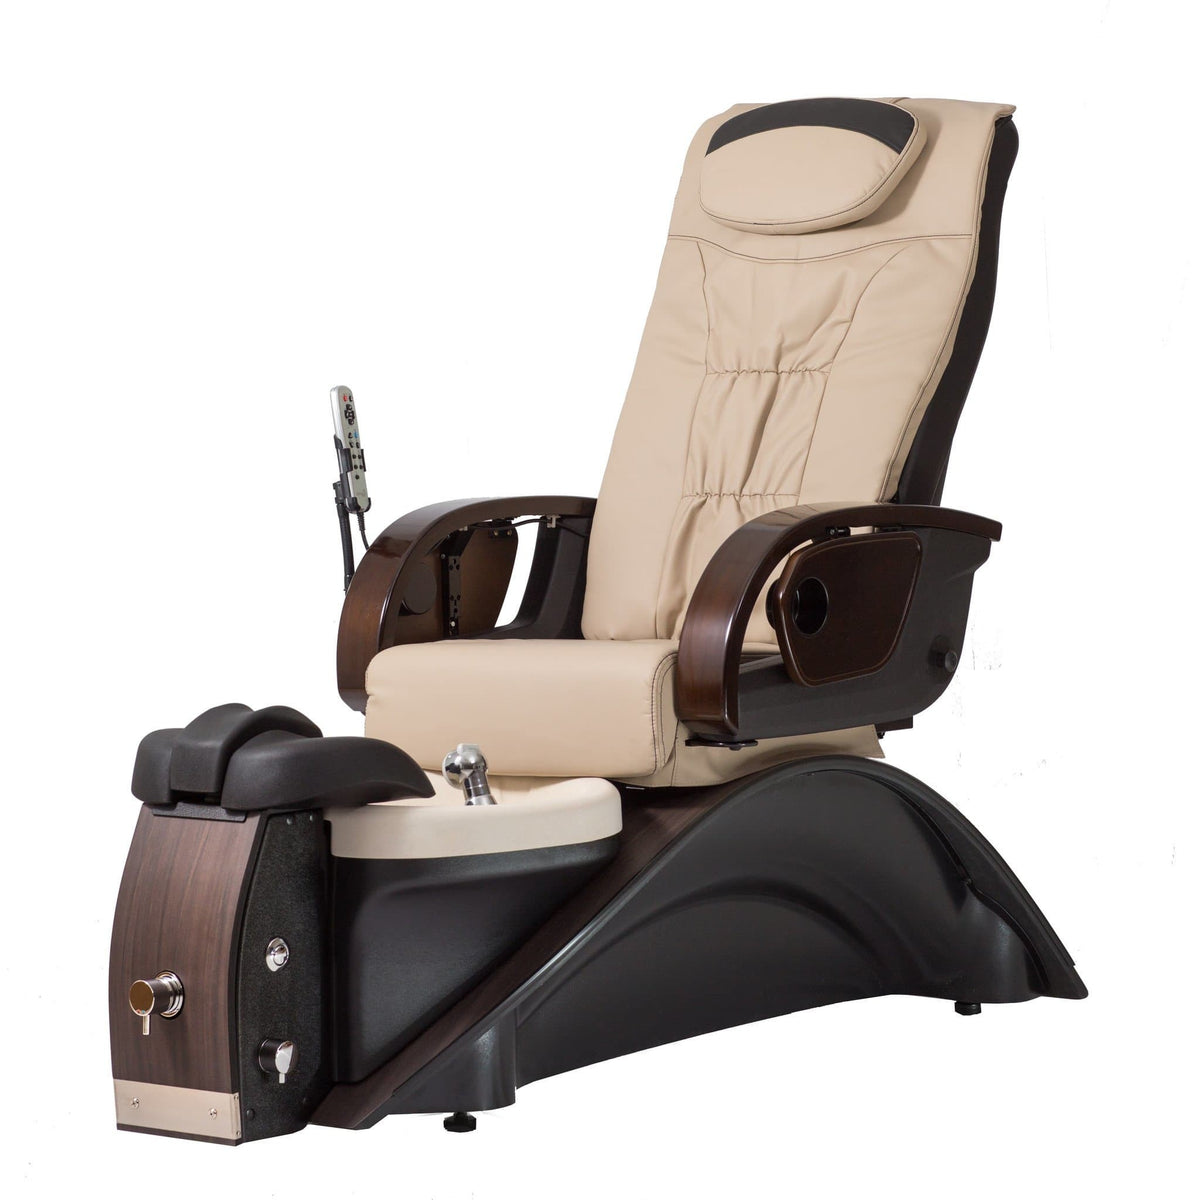 Continuum Continuum Echo LE Pedicure Spa Chair Pedicure &amp; Spa Chairs - ChairsThatGive